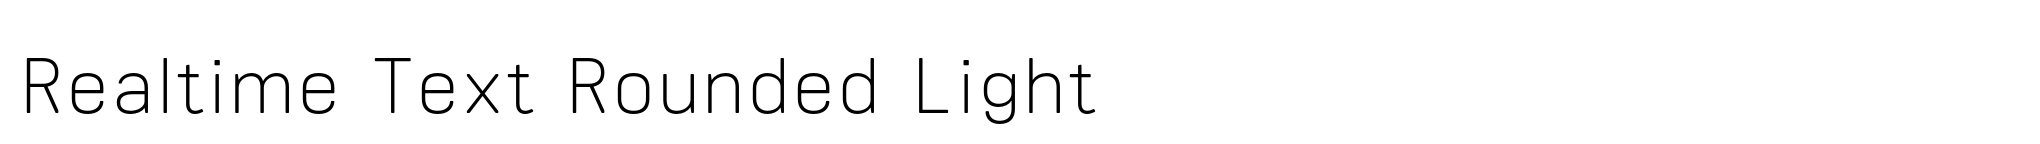 Realtime Text Rounded Light image